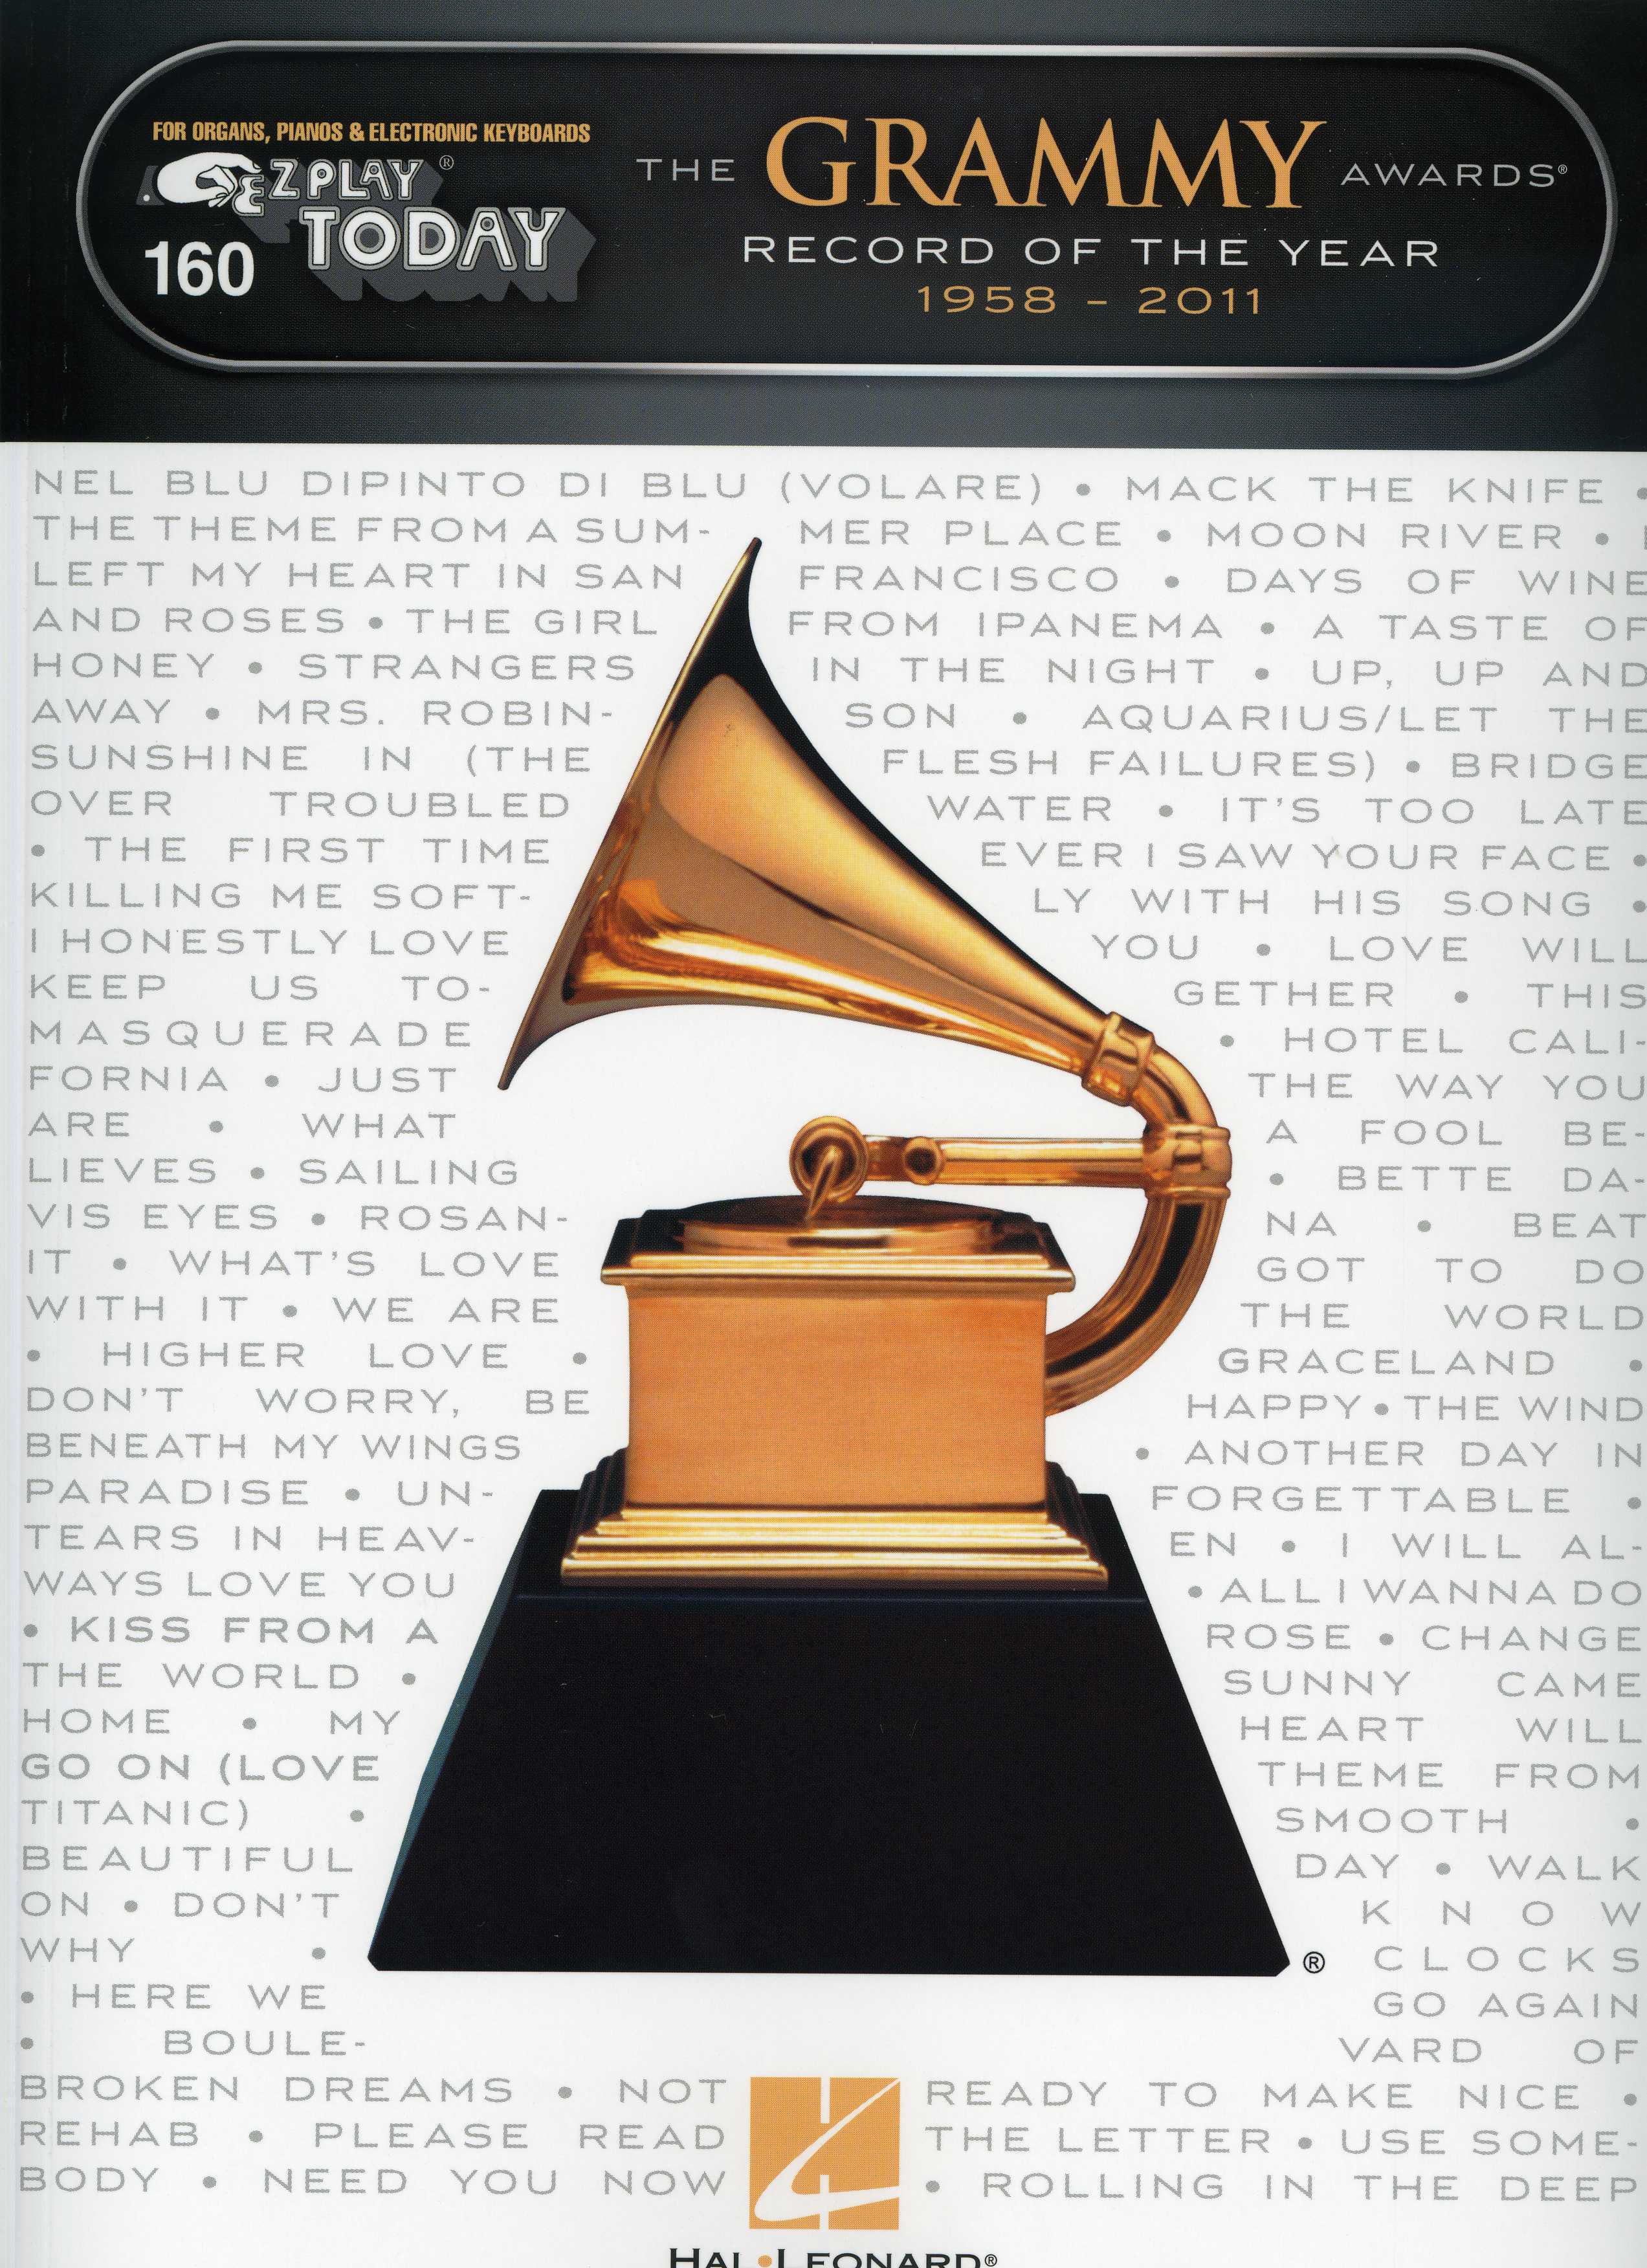 The Grammy Awards Record Of The Year 1958 - 2011